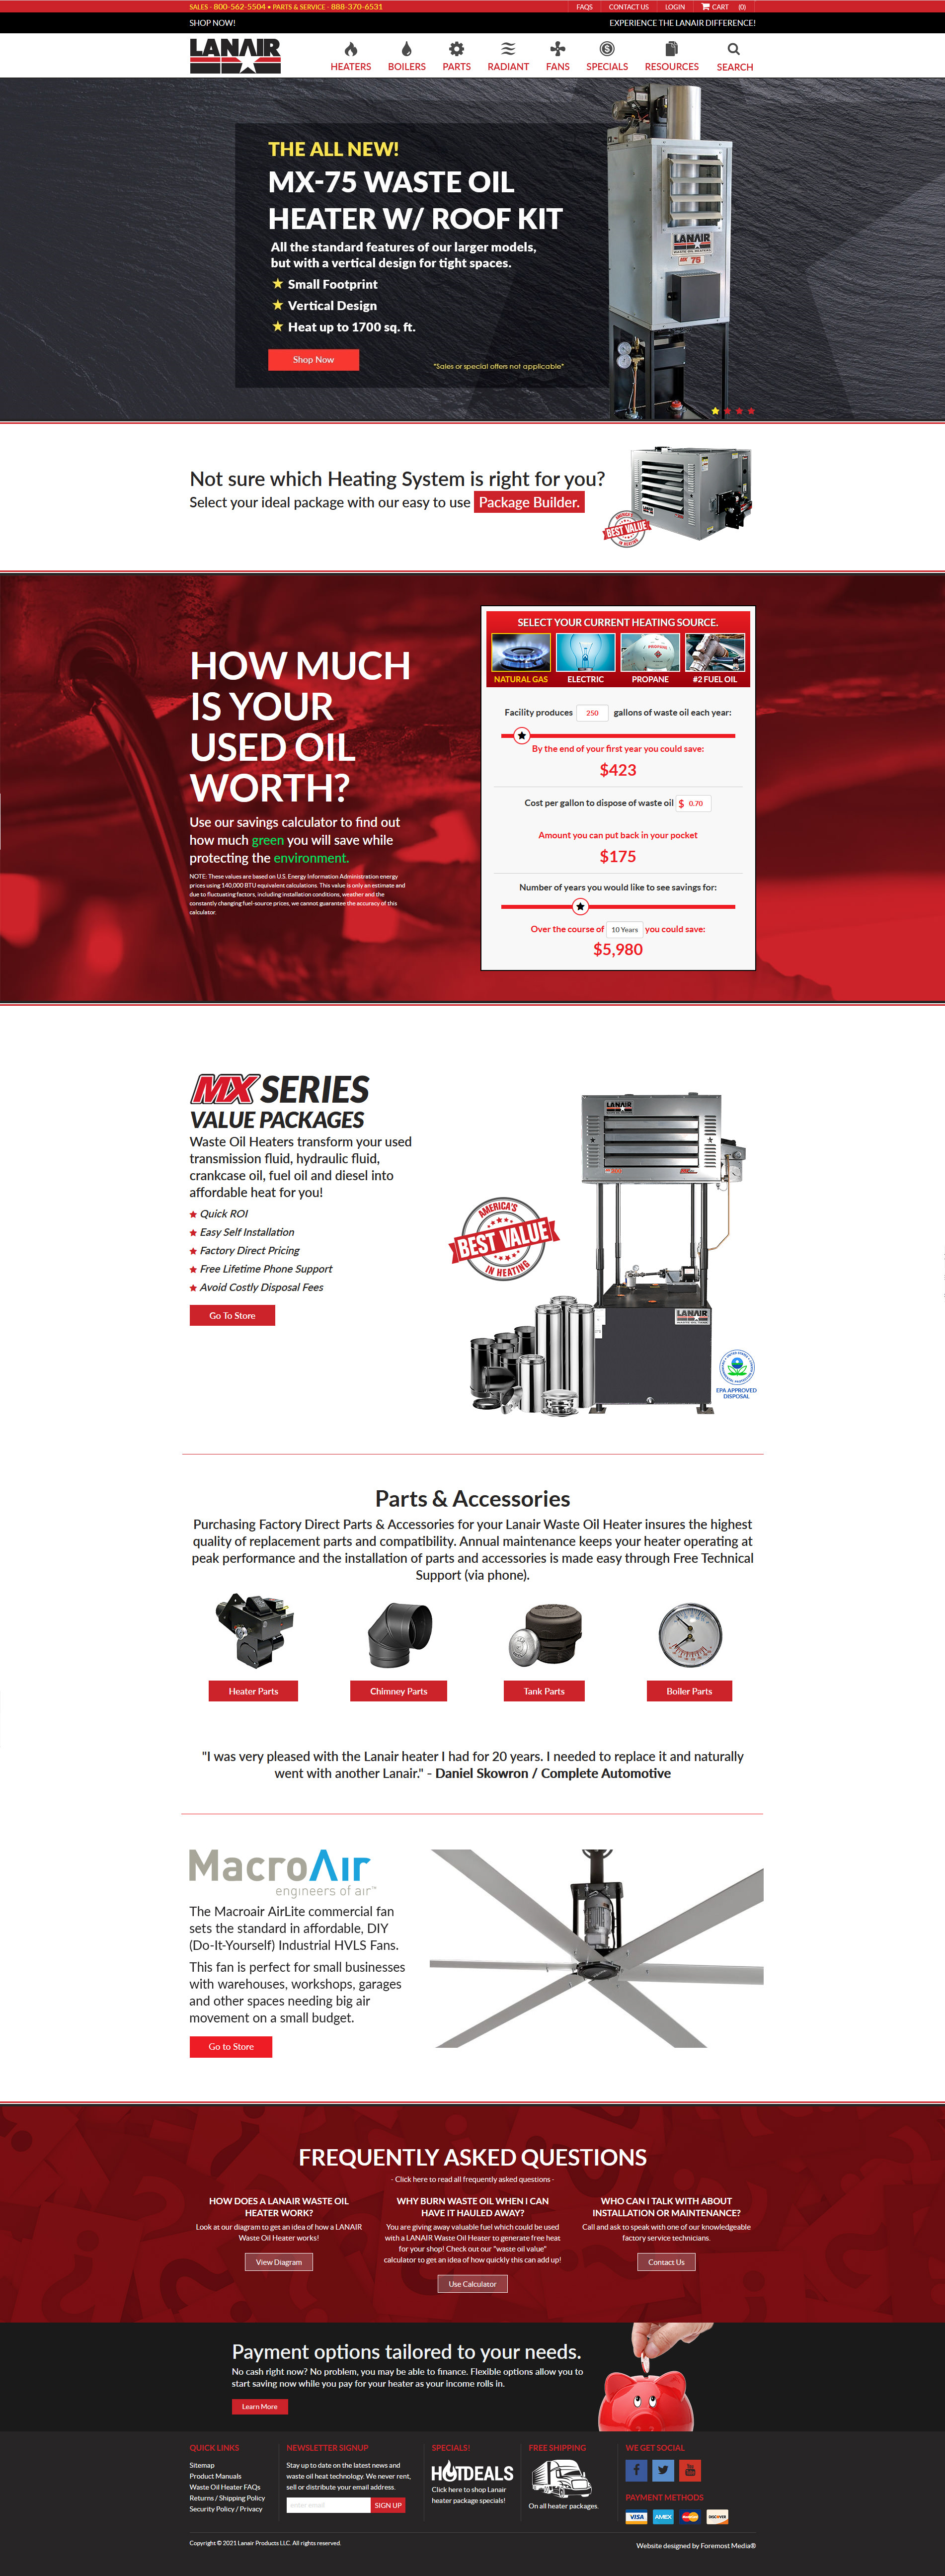 Example of the new and improved nopCommerce website designed by Foremost Media for Lanair Heating and Cooling